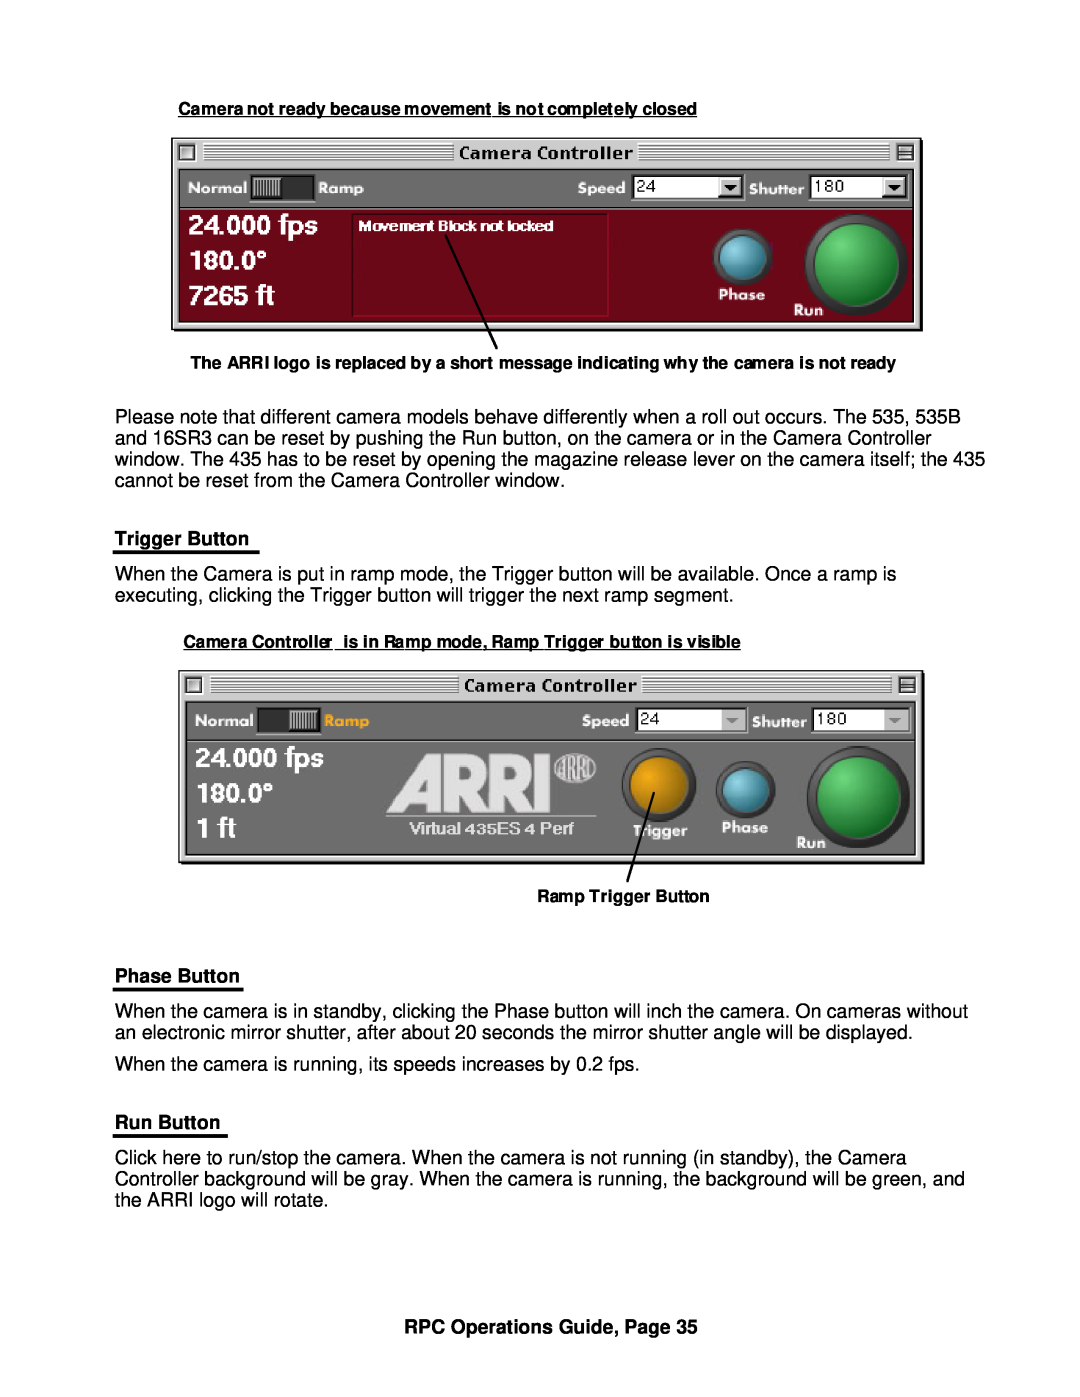 ARRI ARRI Ramp Preview Controller manual Trigger Button, Phase Button, Run Button, RPC Operations Guide, Page 